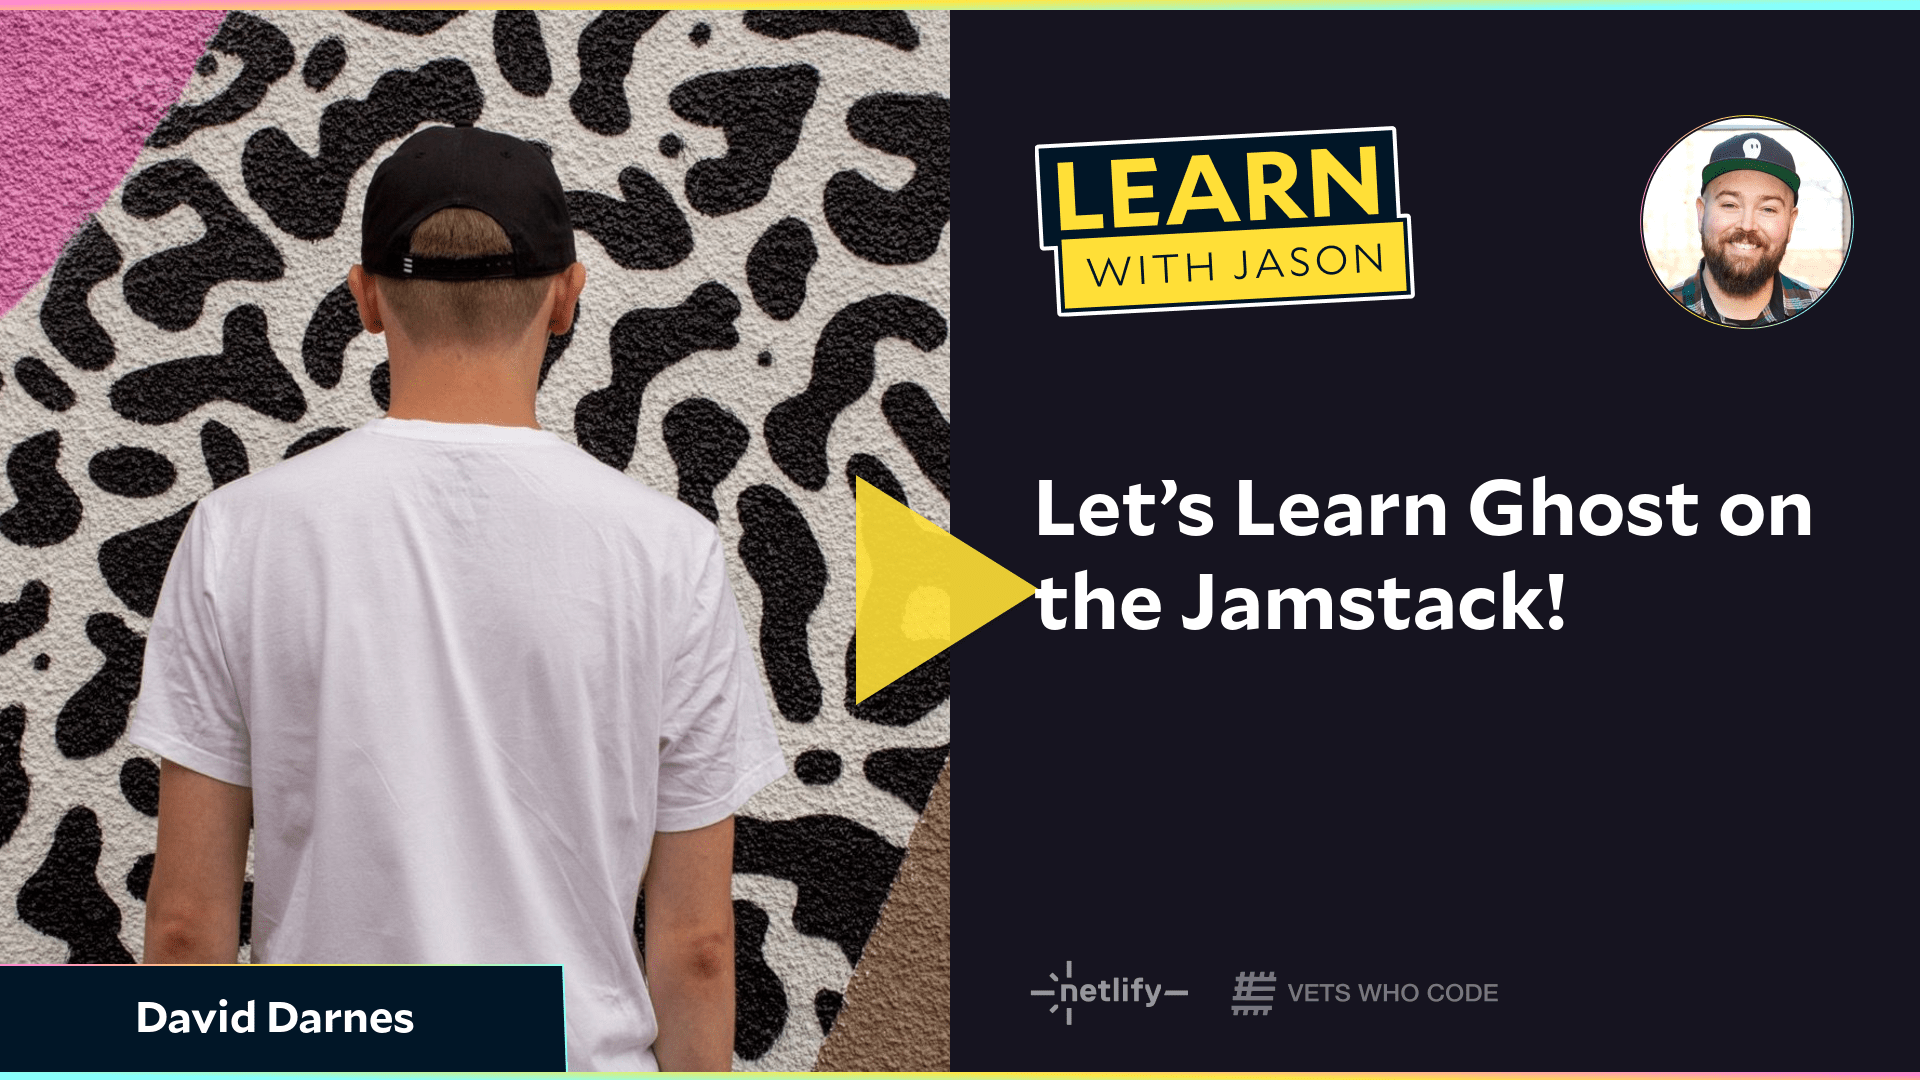 Let’s Learn Ghost on the Jamstack! (with David Darnes)